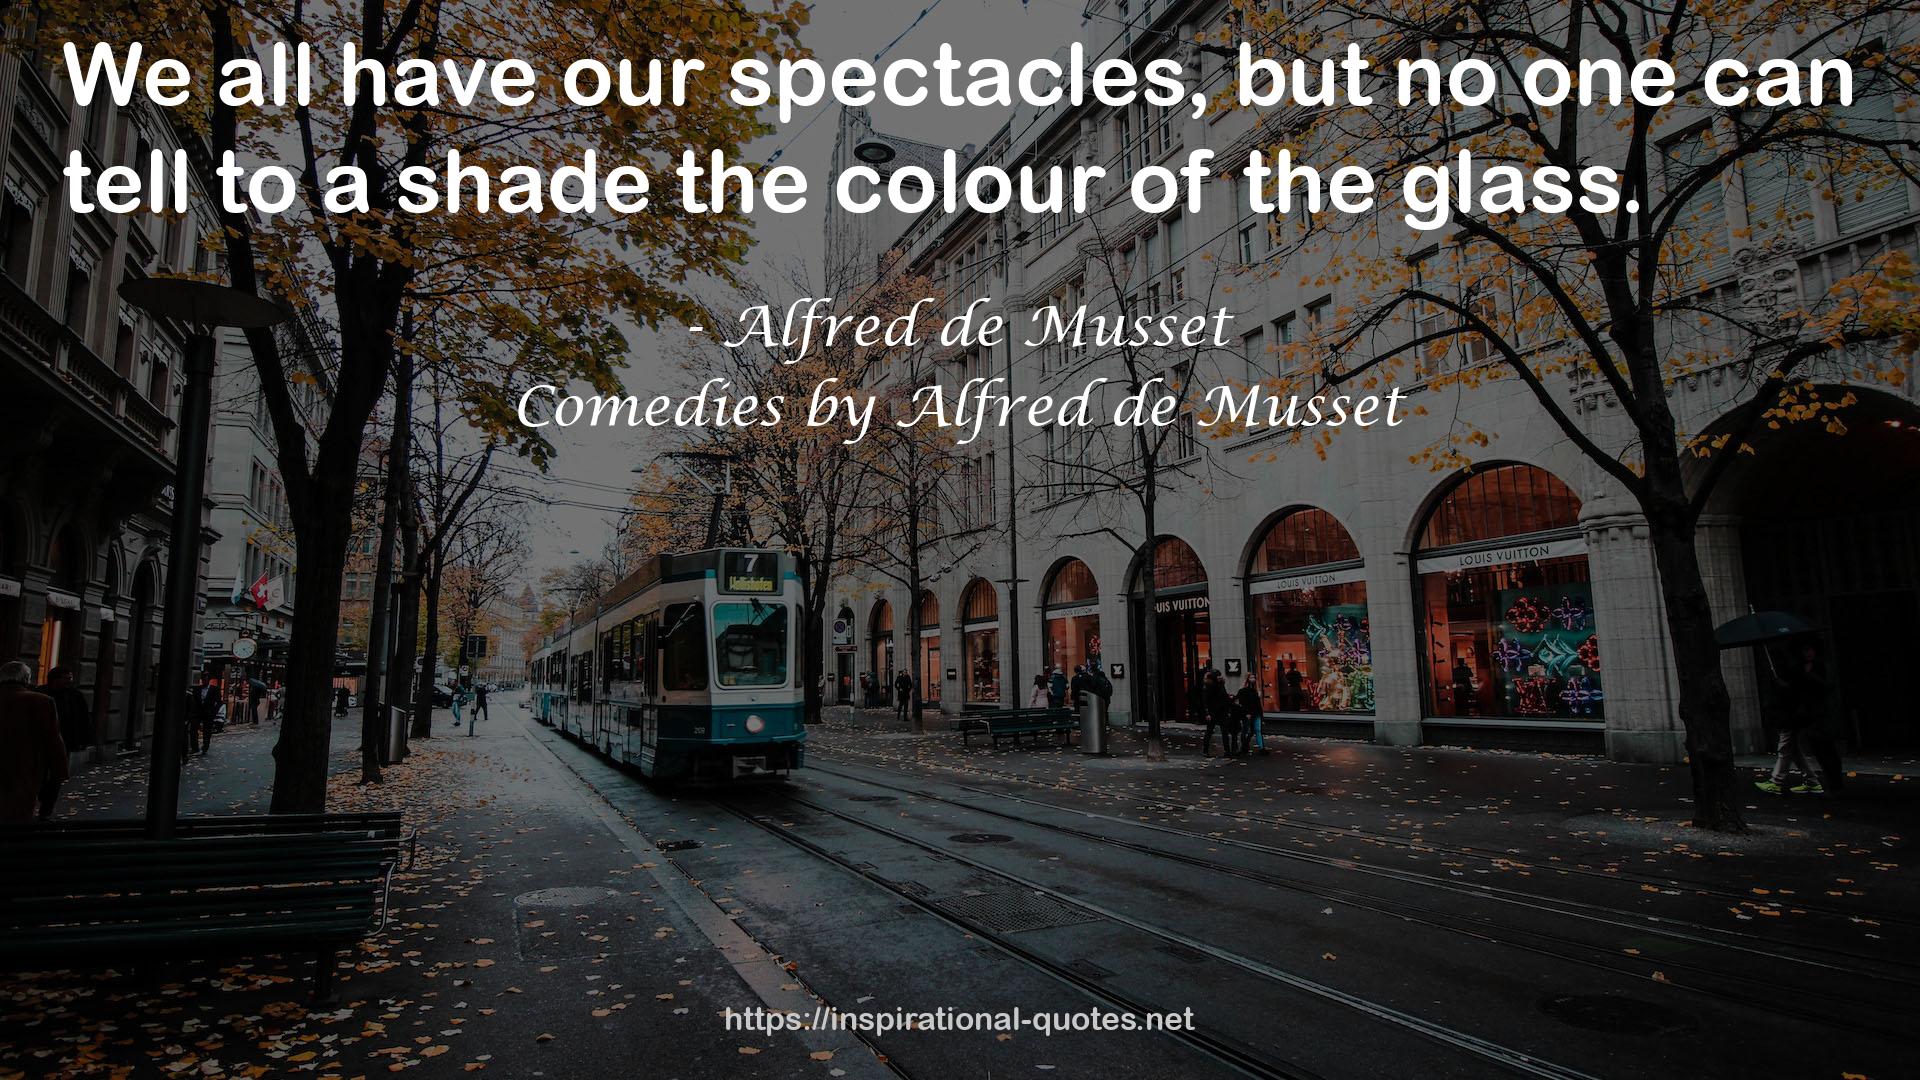 Comedies by Alfred de Musset QUOTES